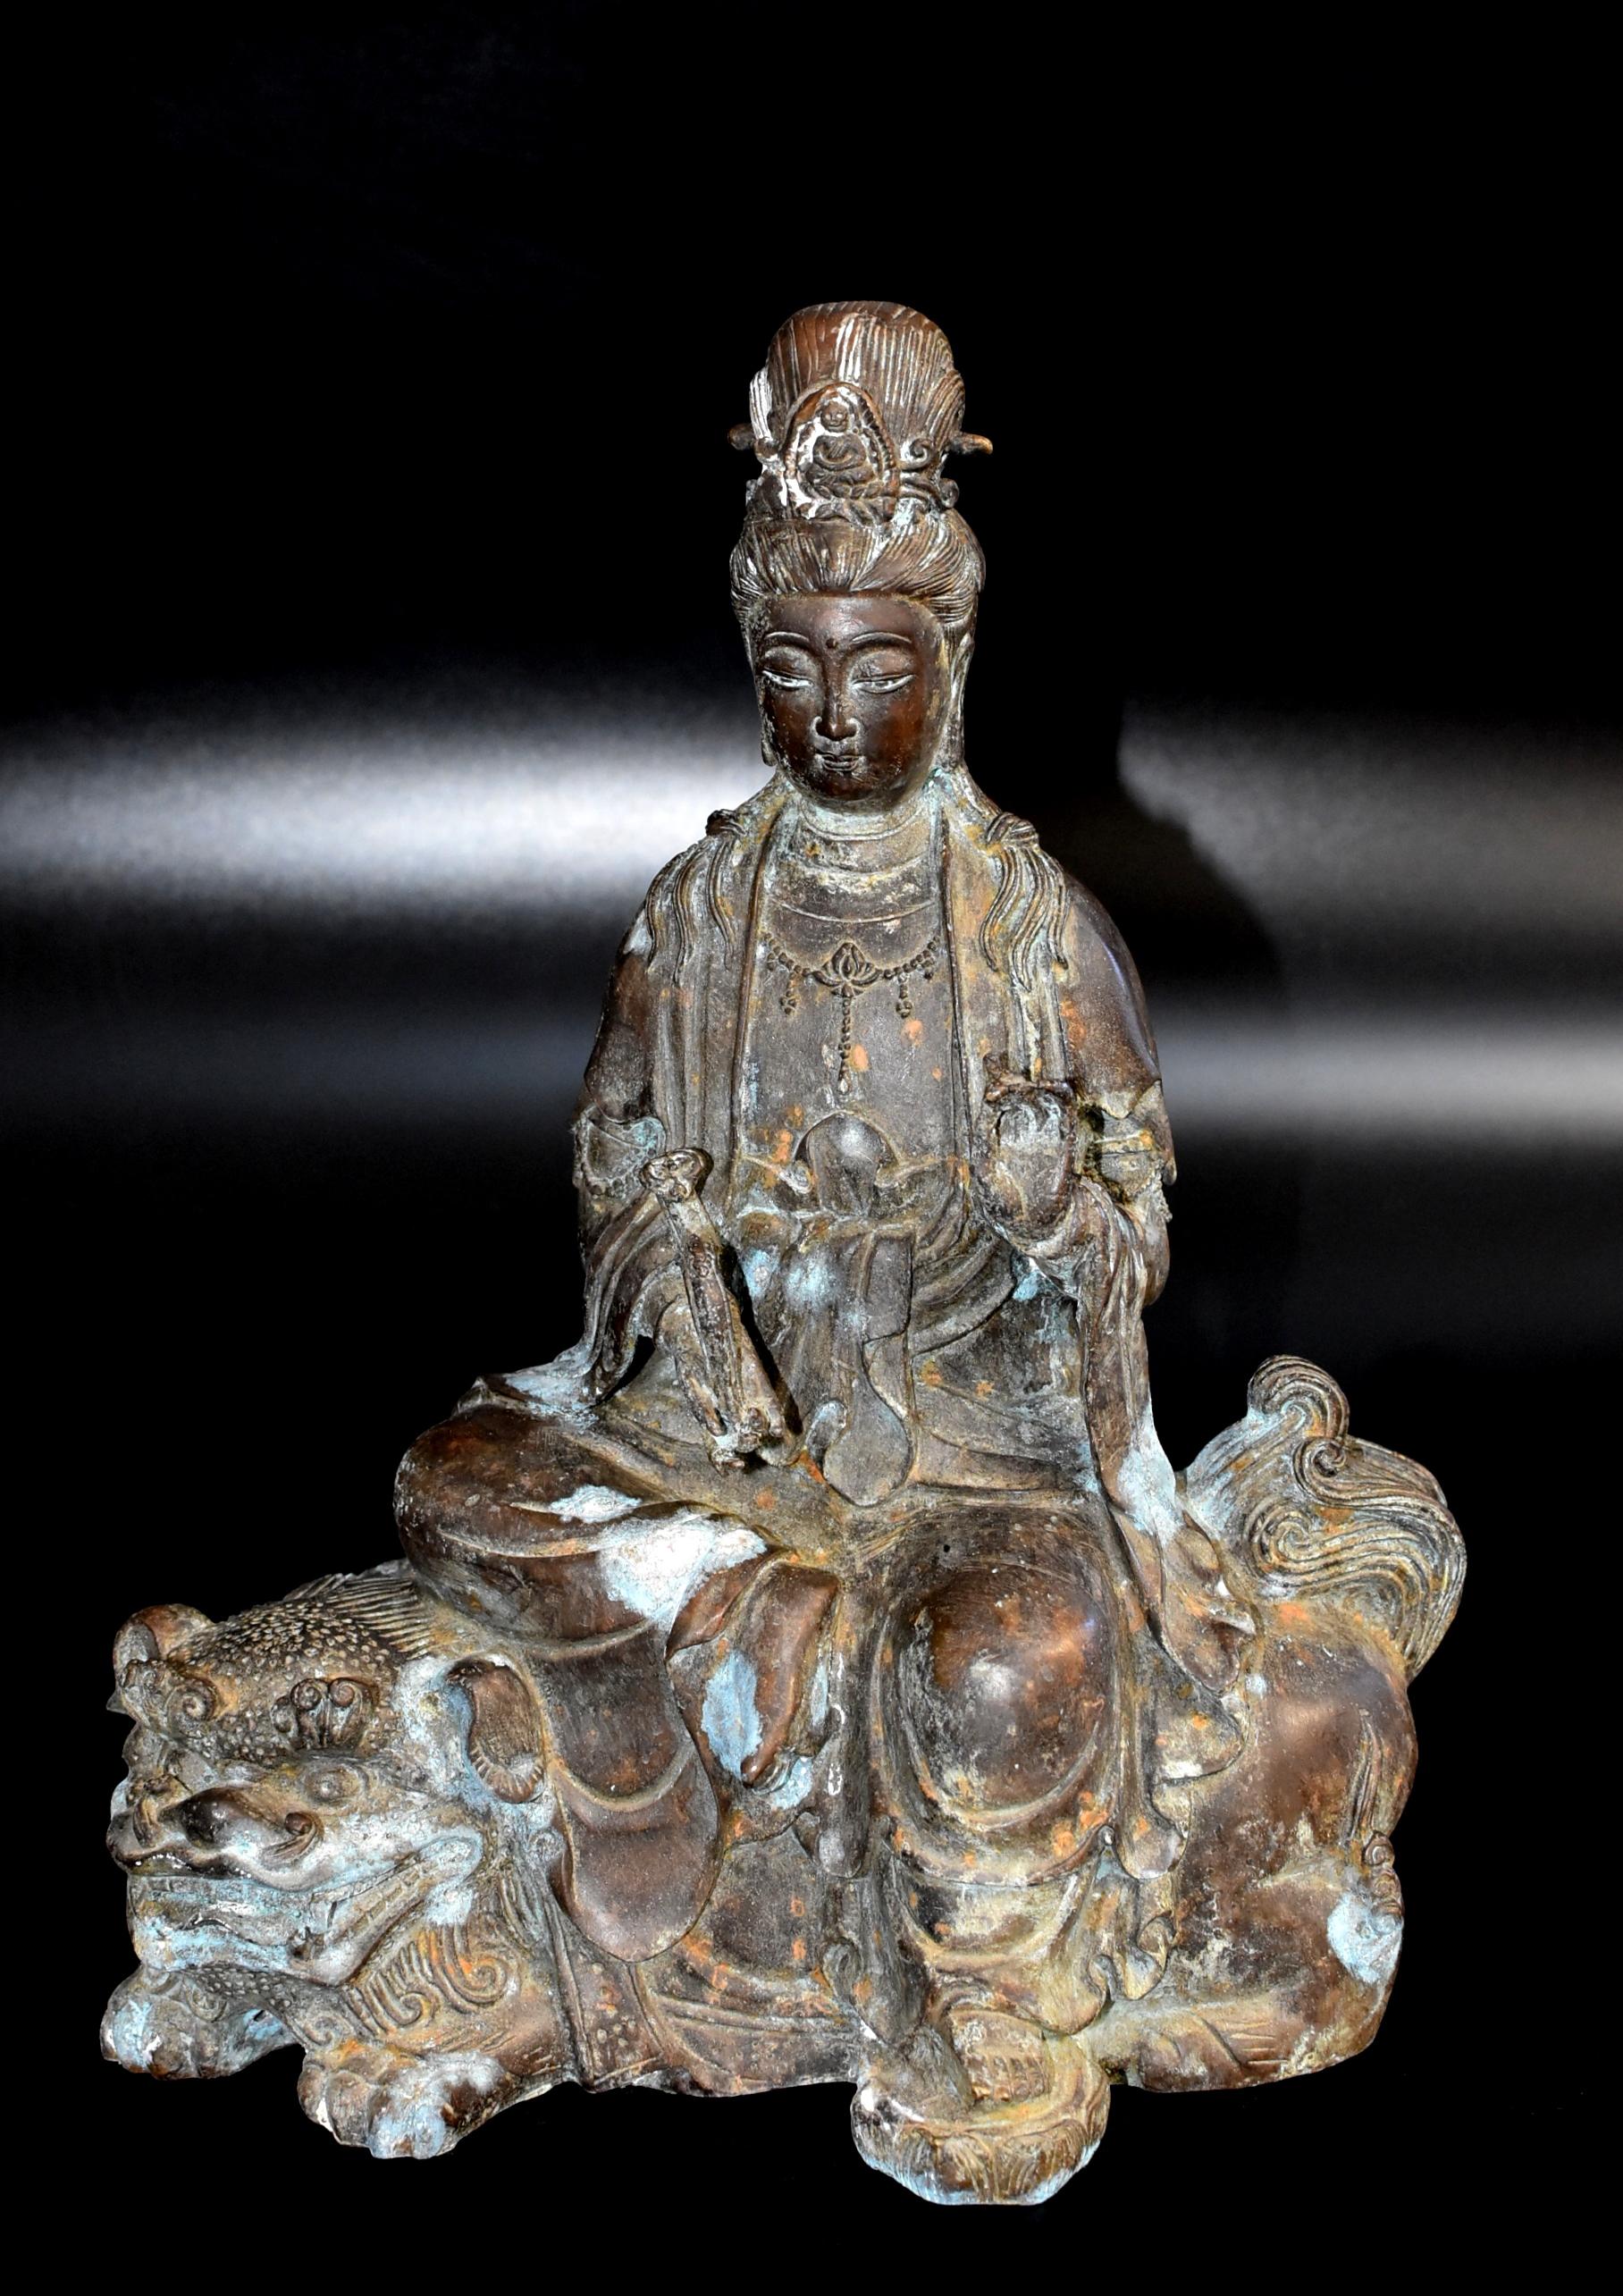 A wonderful old piece of bronze sculpture featuring the Chinese Goddess of Compassion Guan Yin, Bodhisattva Avalokiteshvara. Seated on a recumbent Foo Dog lion, the figure rendered a serene expression framed by a pair of long earlobes, the downcast